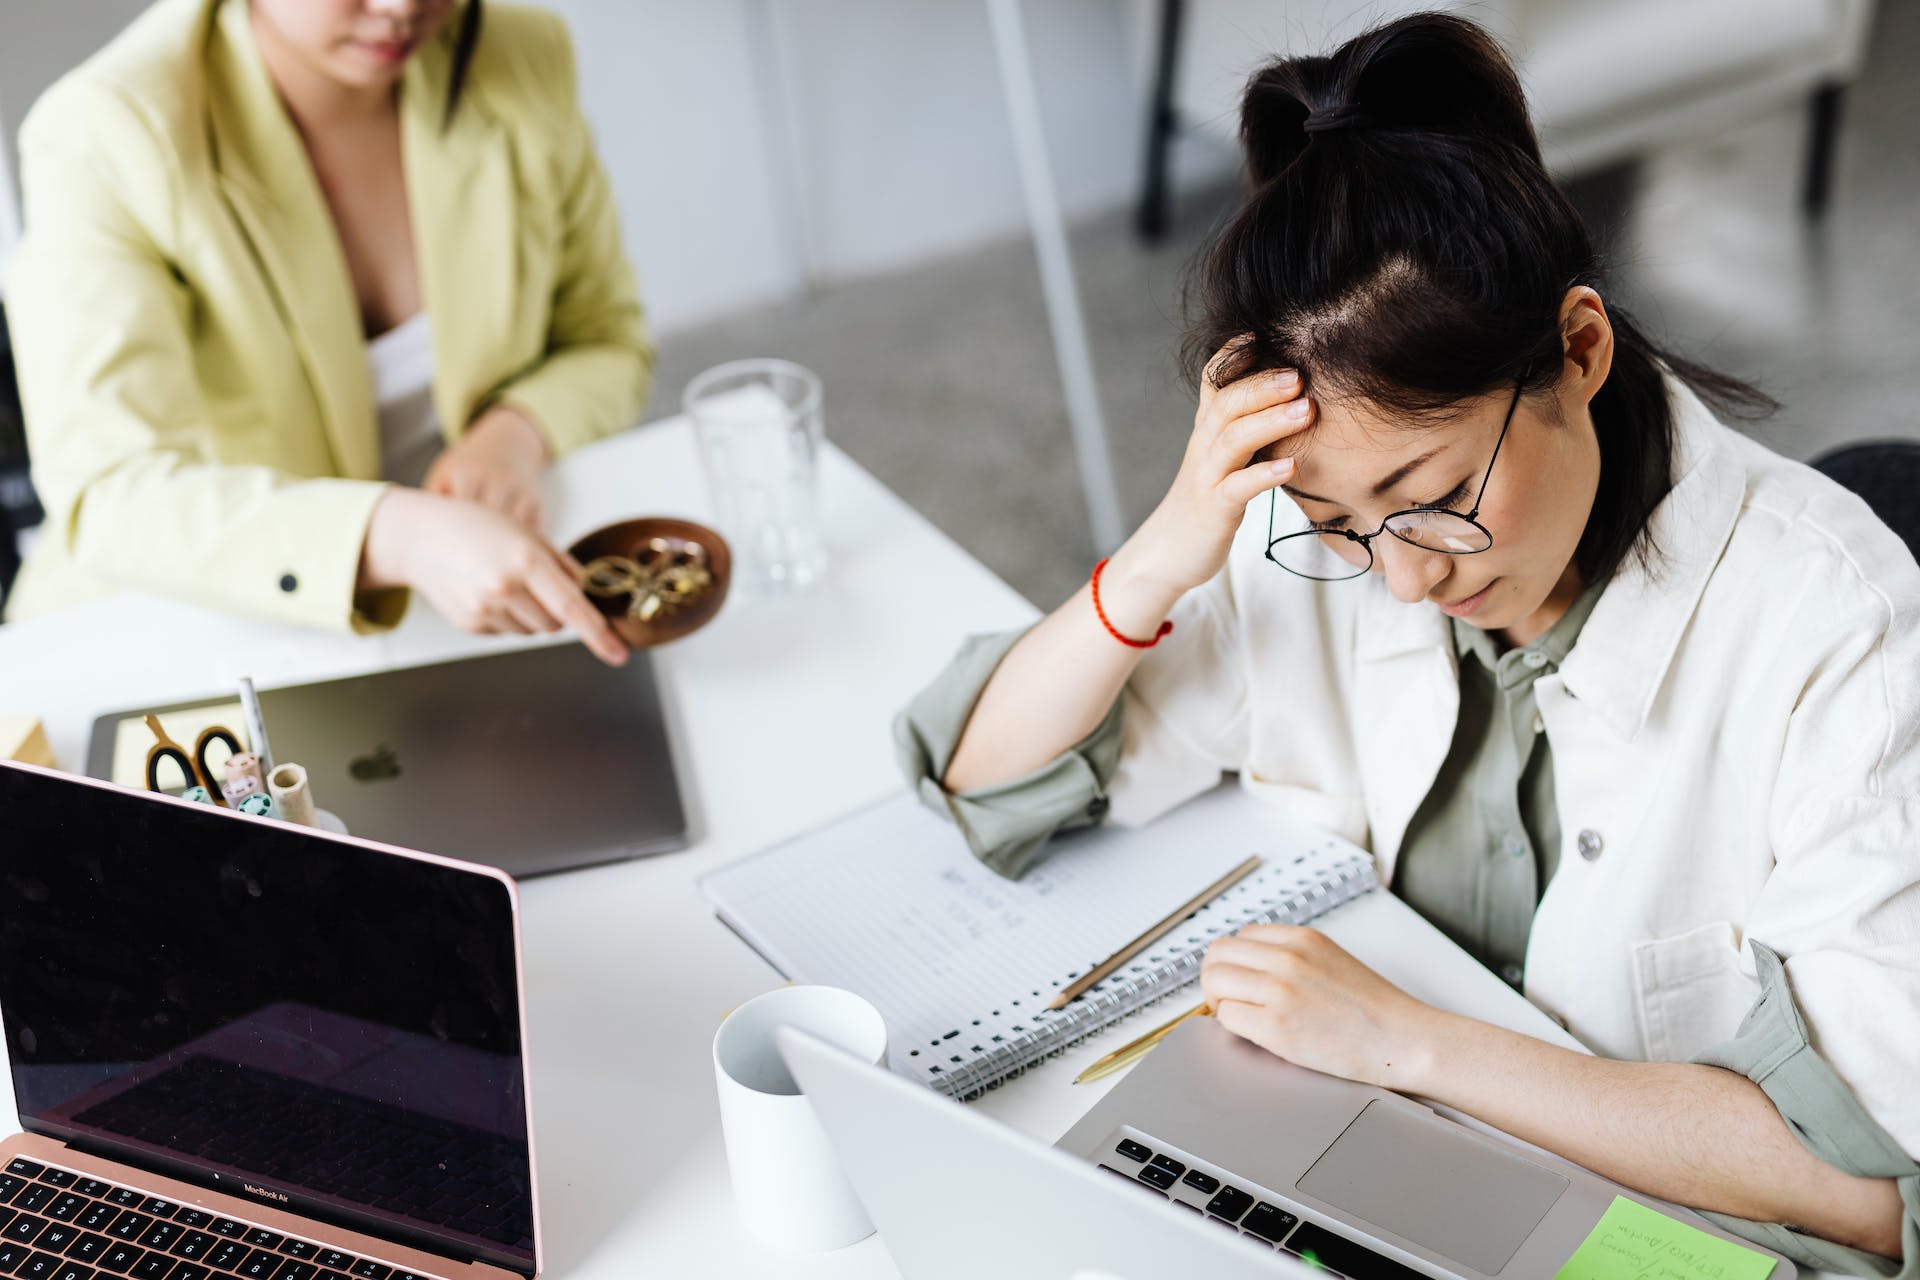 A stressed woman at work | Source: Pexels